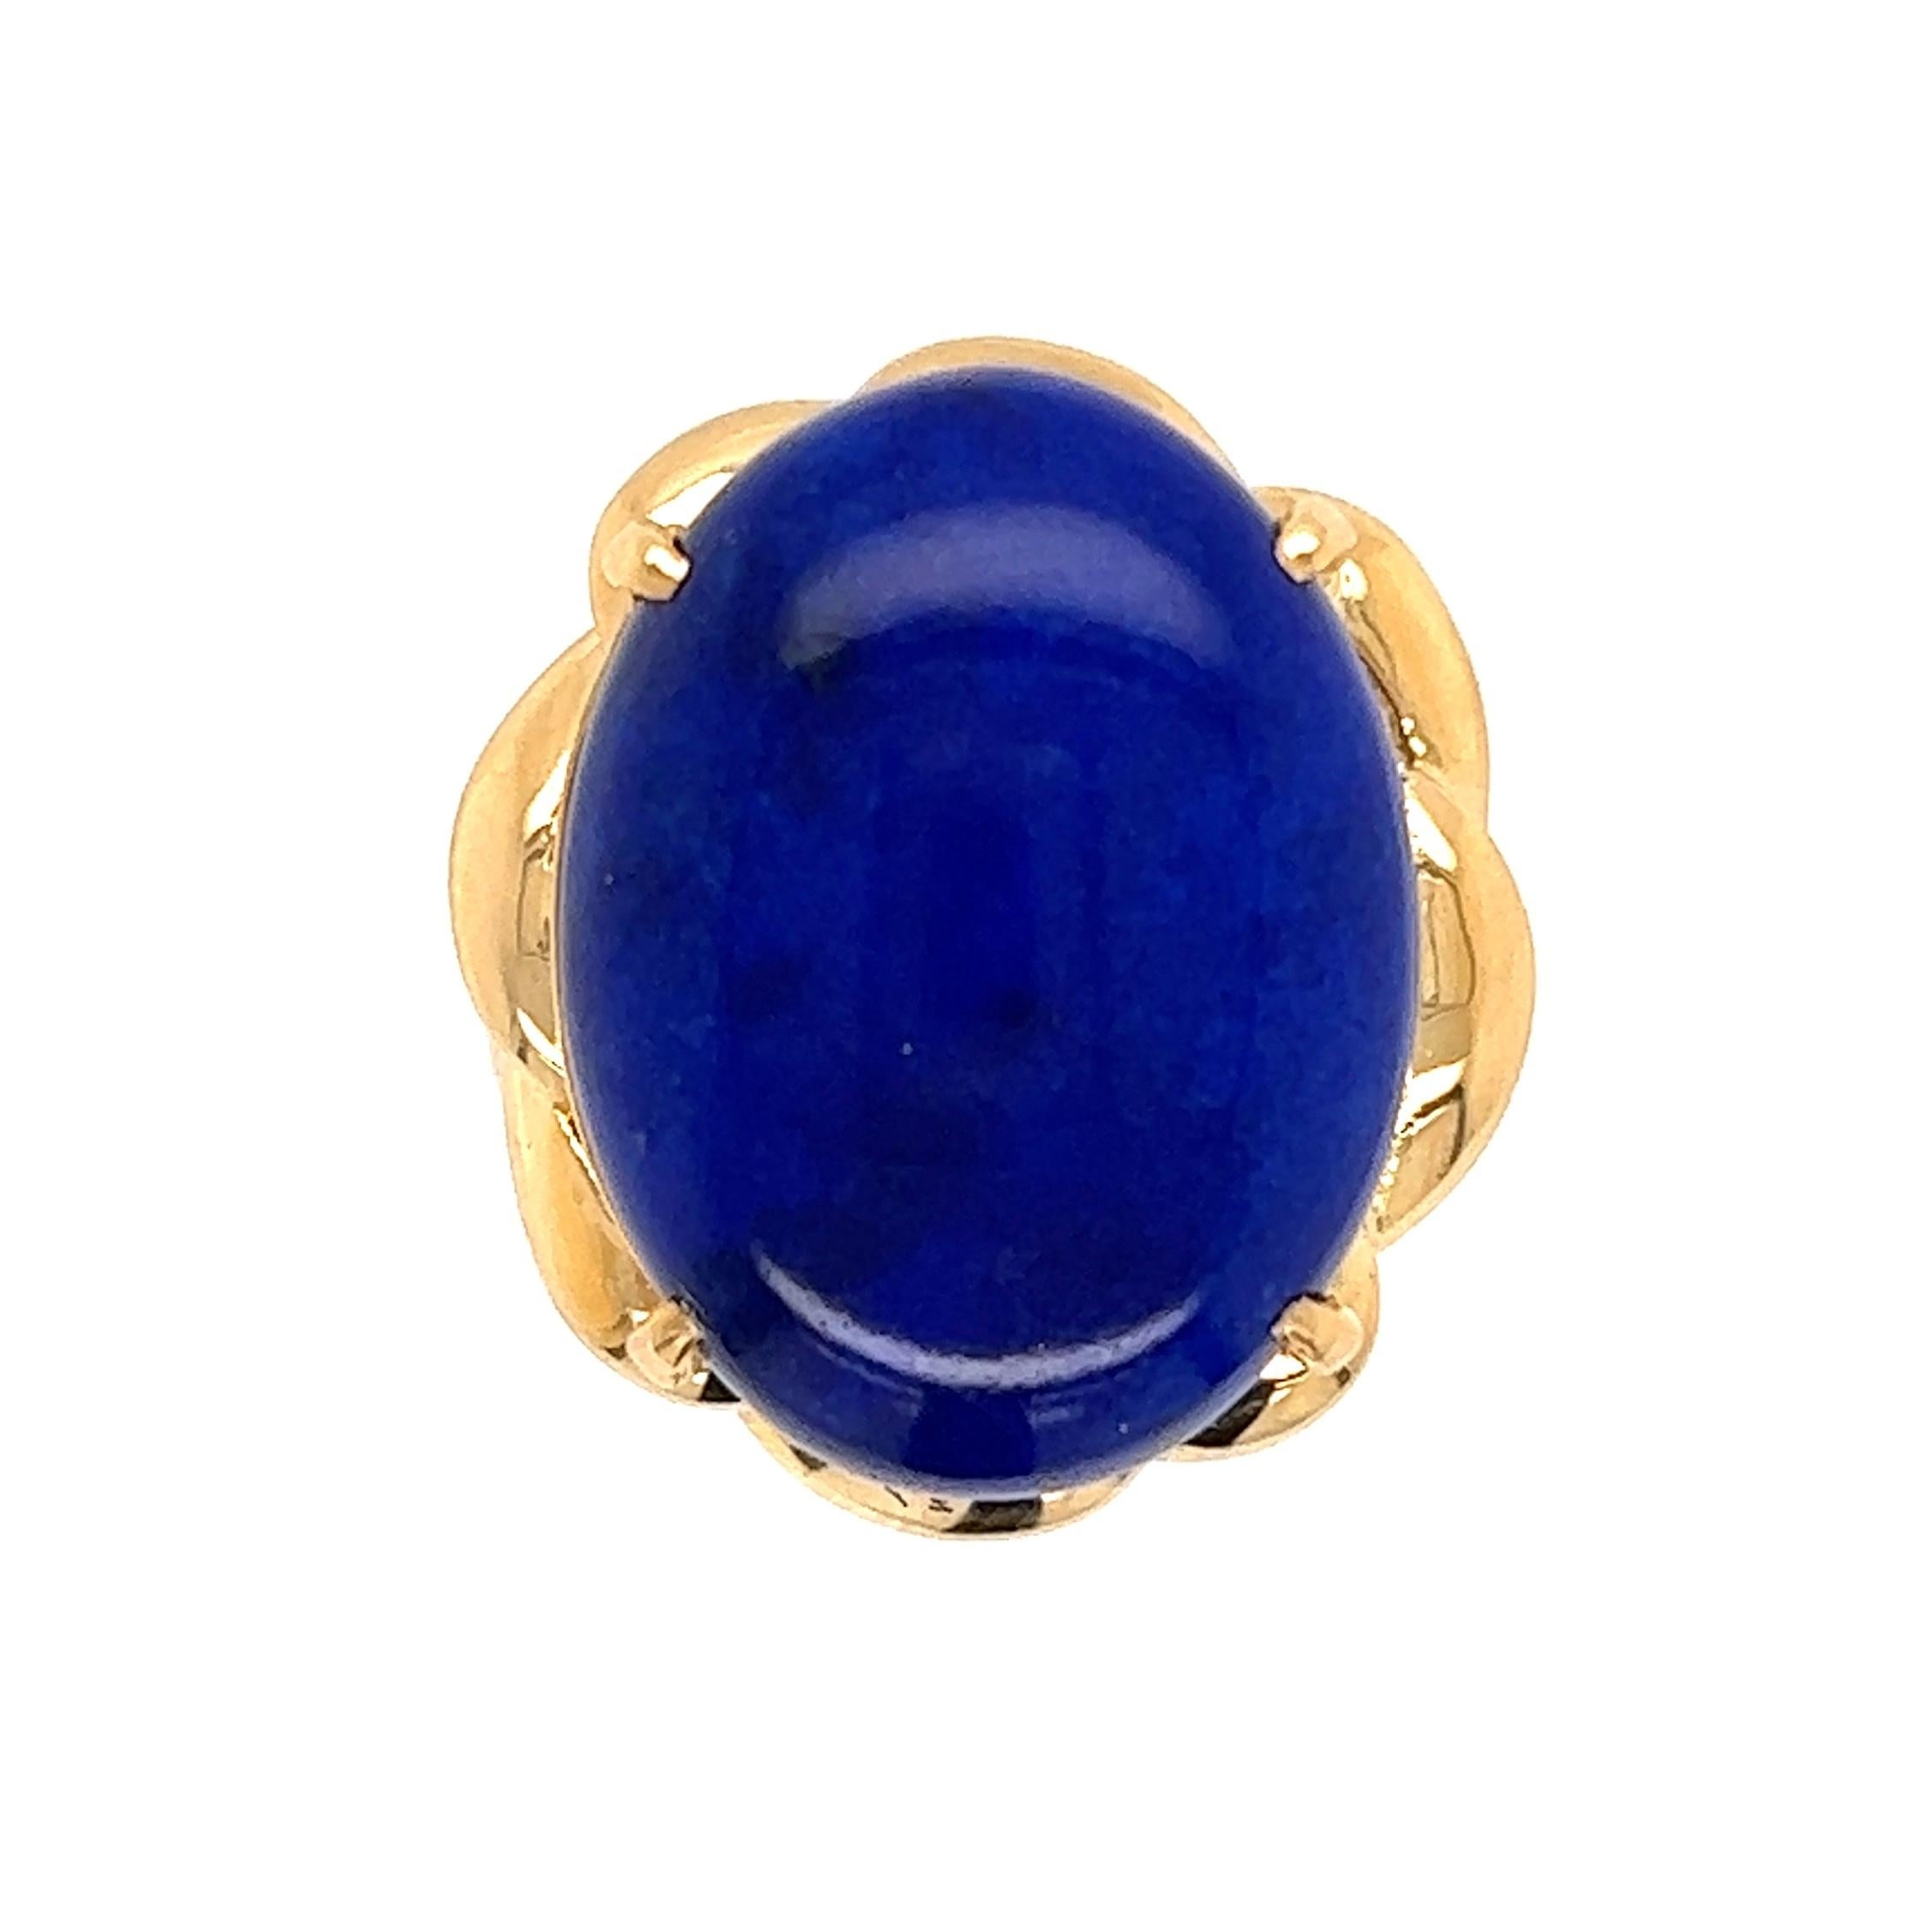 8 Carat Lapis Lazuli Mid-Century Modern Gold Ring Estate Fine Jewelry In Excellent Condition For Sale In Montreal, QC